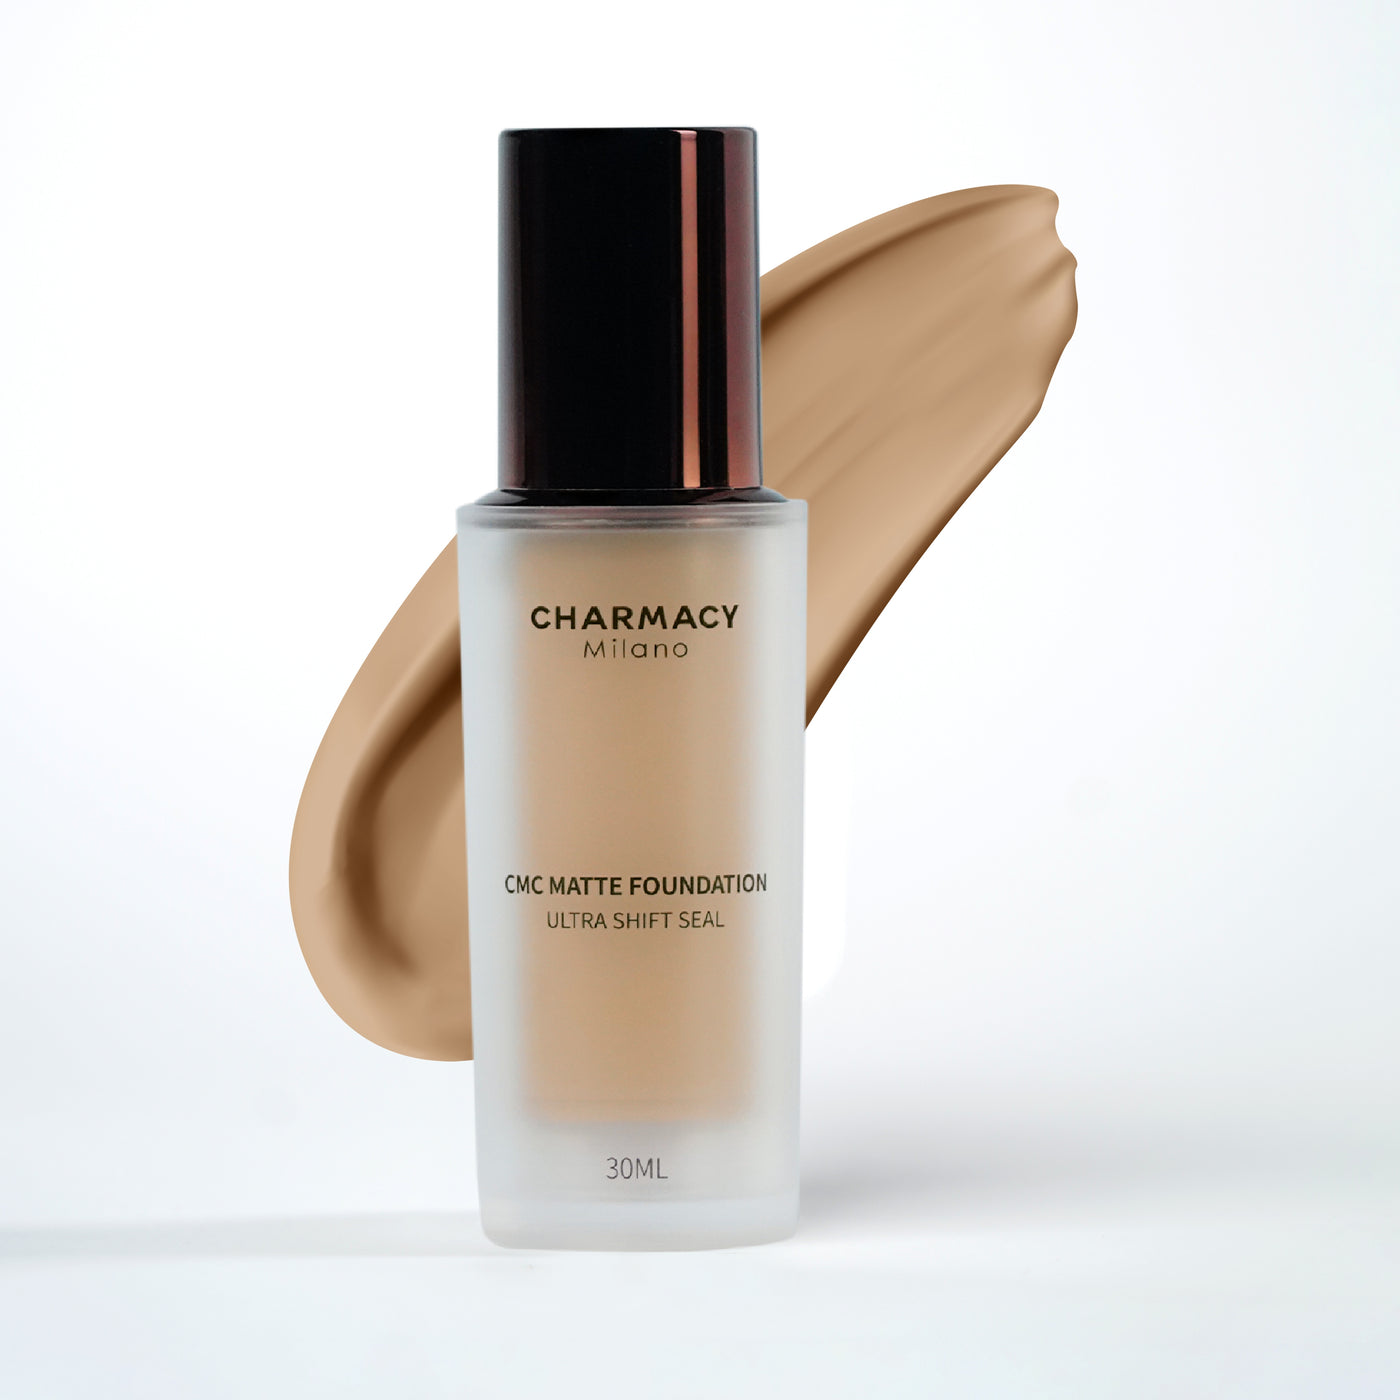 Matte Foundation for Radiant Finish | Charmacy Milano 